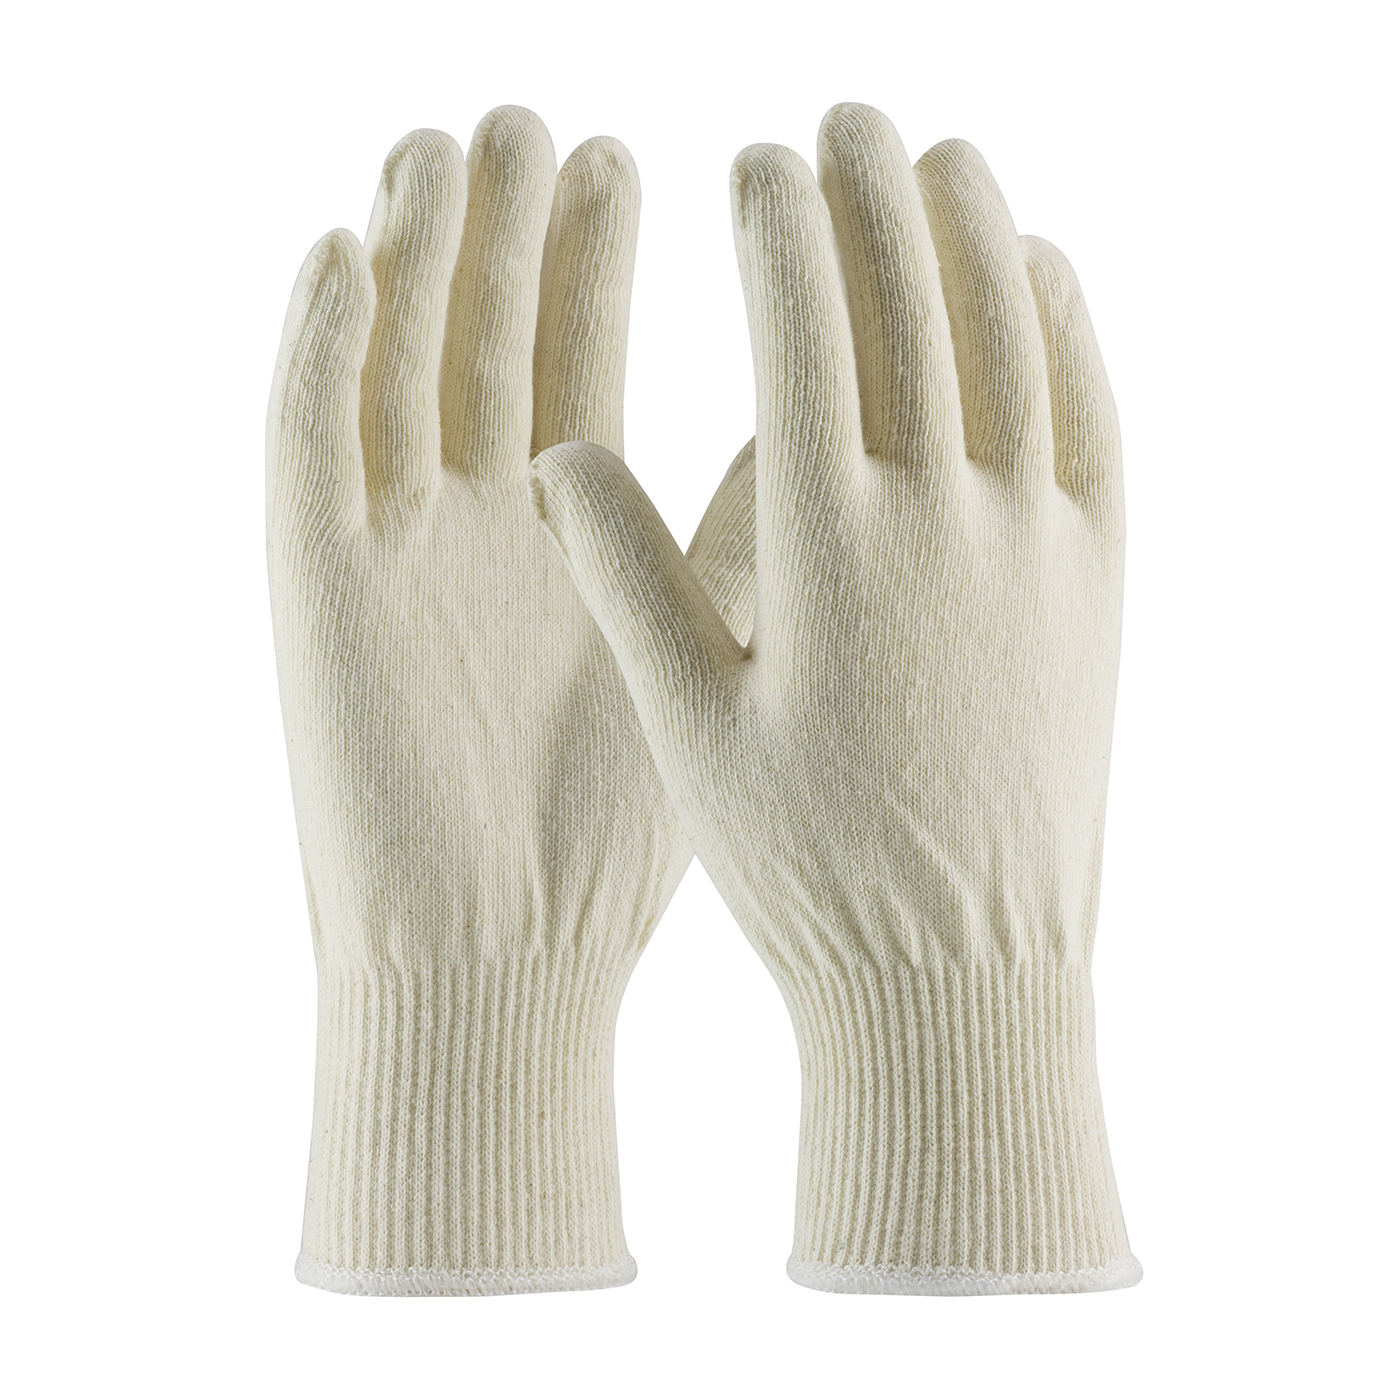 PIP® 35-C2113/S Lightweight Gloves, Seamless Style, S, Cotton/Polyester Palm, 13 ga Cotton/Polyester, Natural, Continuous Knit Wrist Cuff, Uncoated Coating, Cotton/Polyester Lining